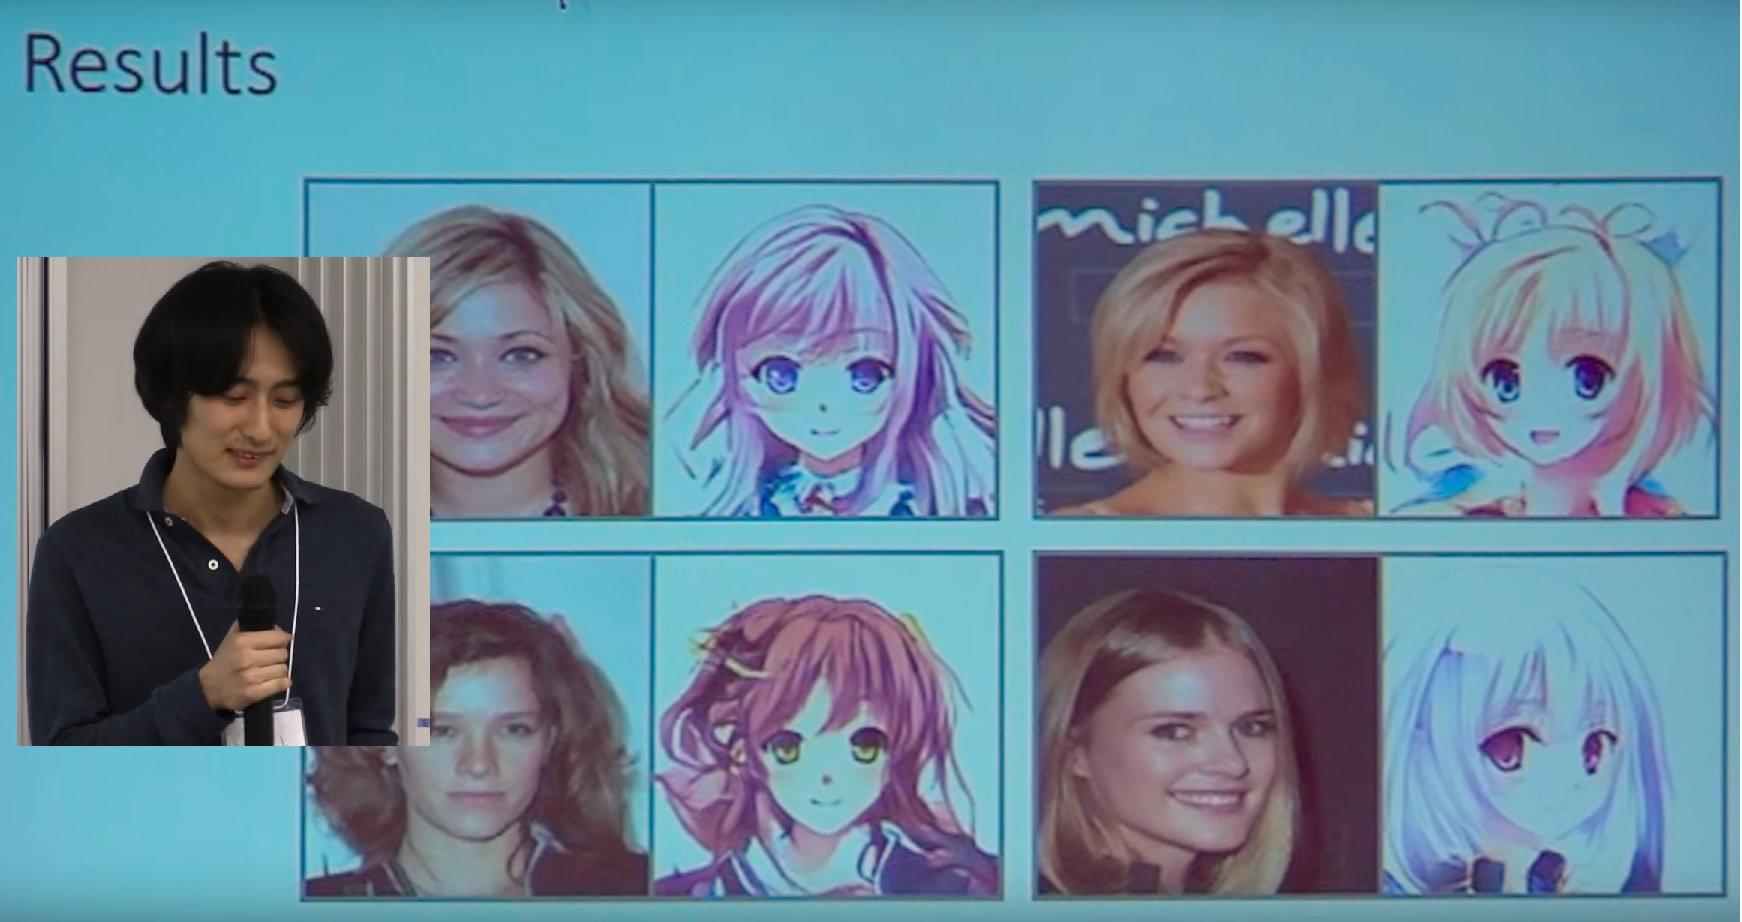 How To Make Normal Photo Into Anime Version | Punk Missong - YouTube